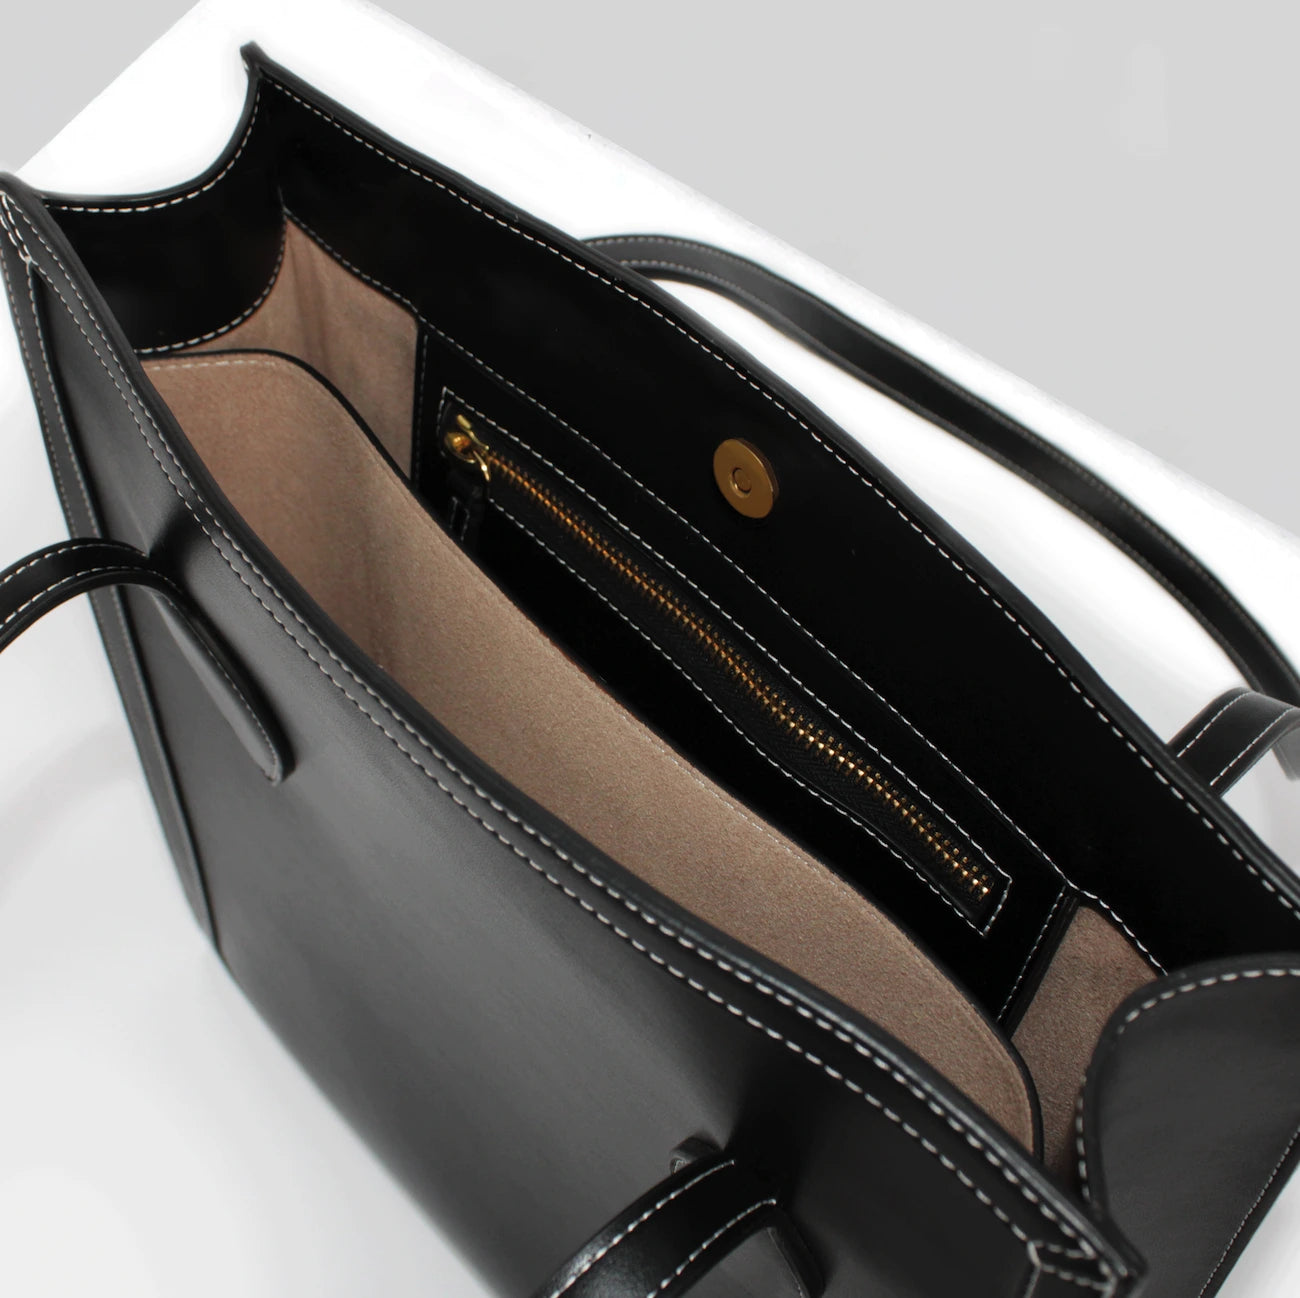 Kenmare Bag In Smooth Black Apple Leather